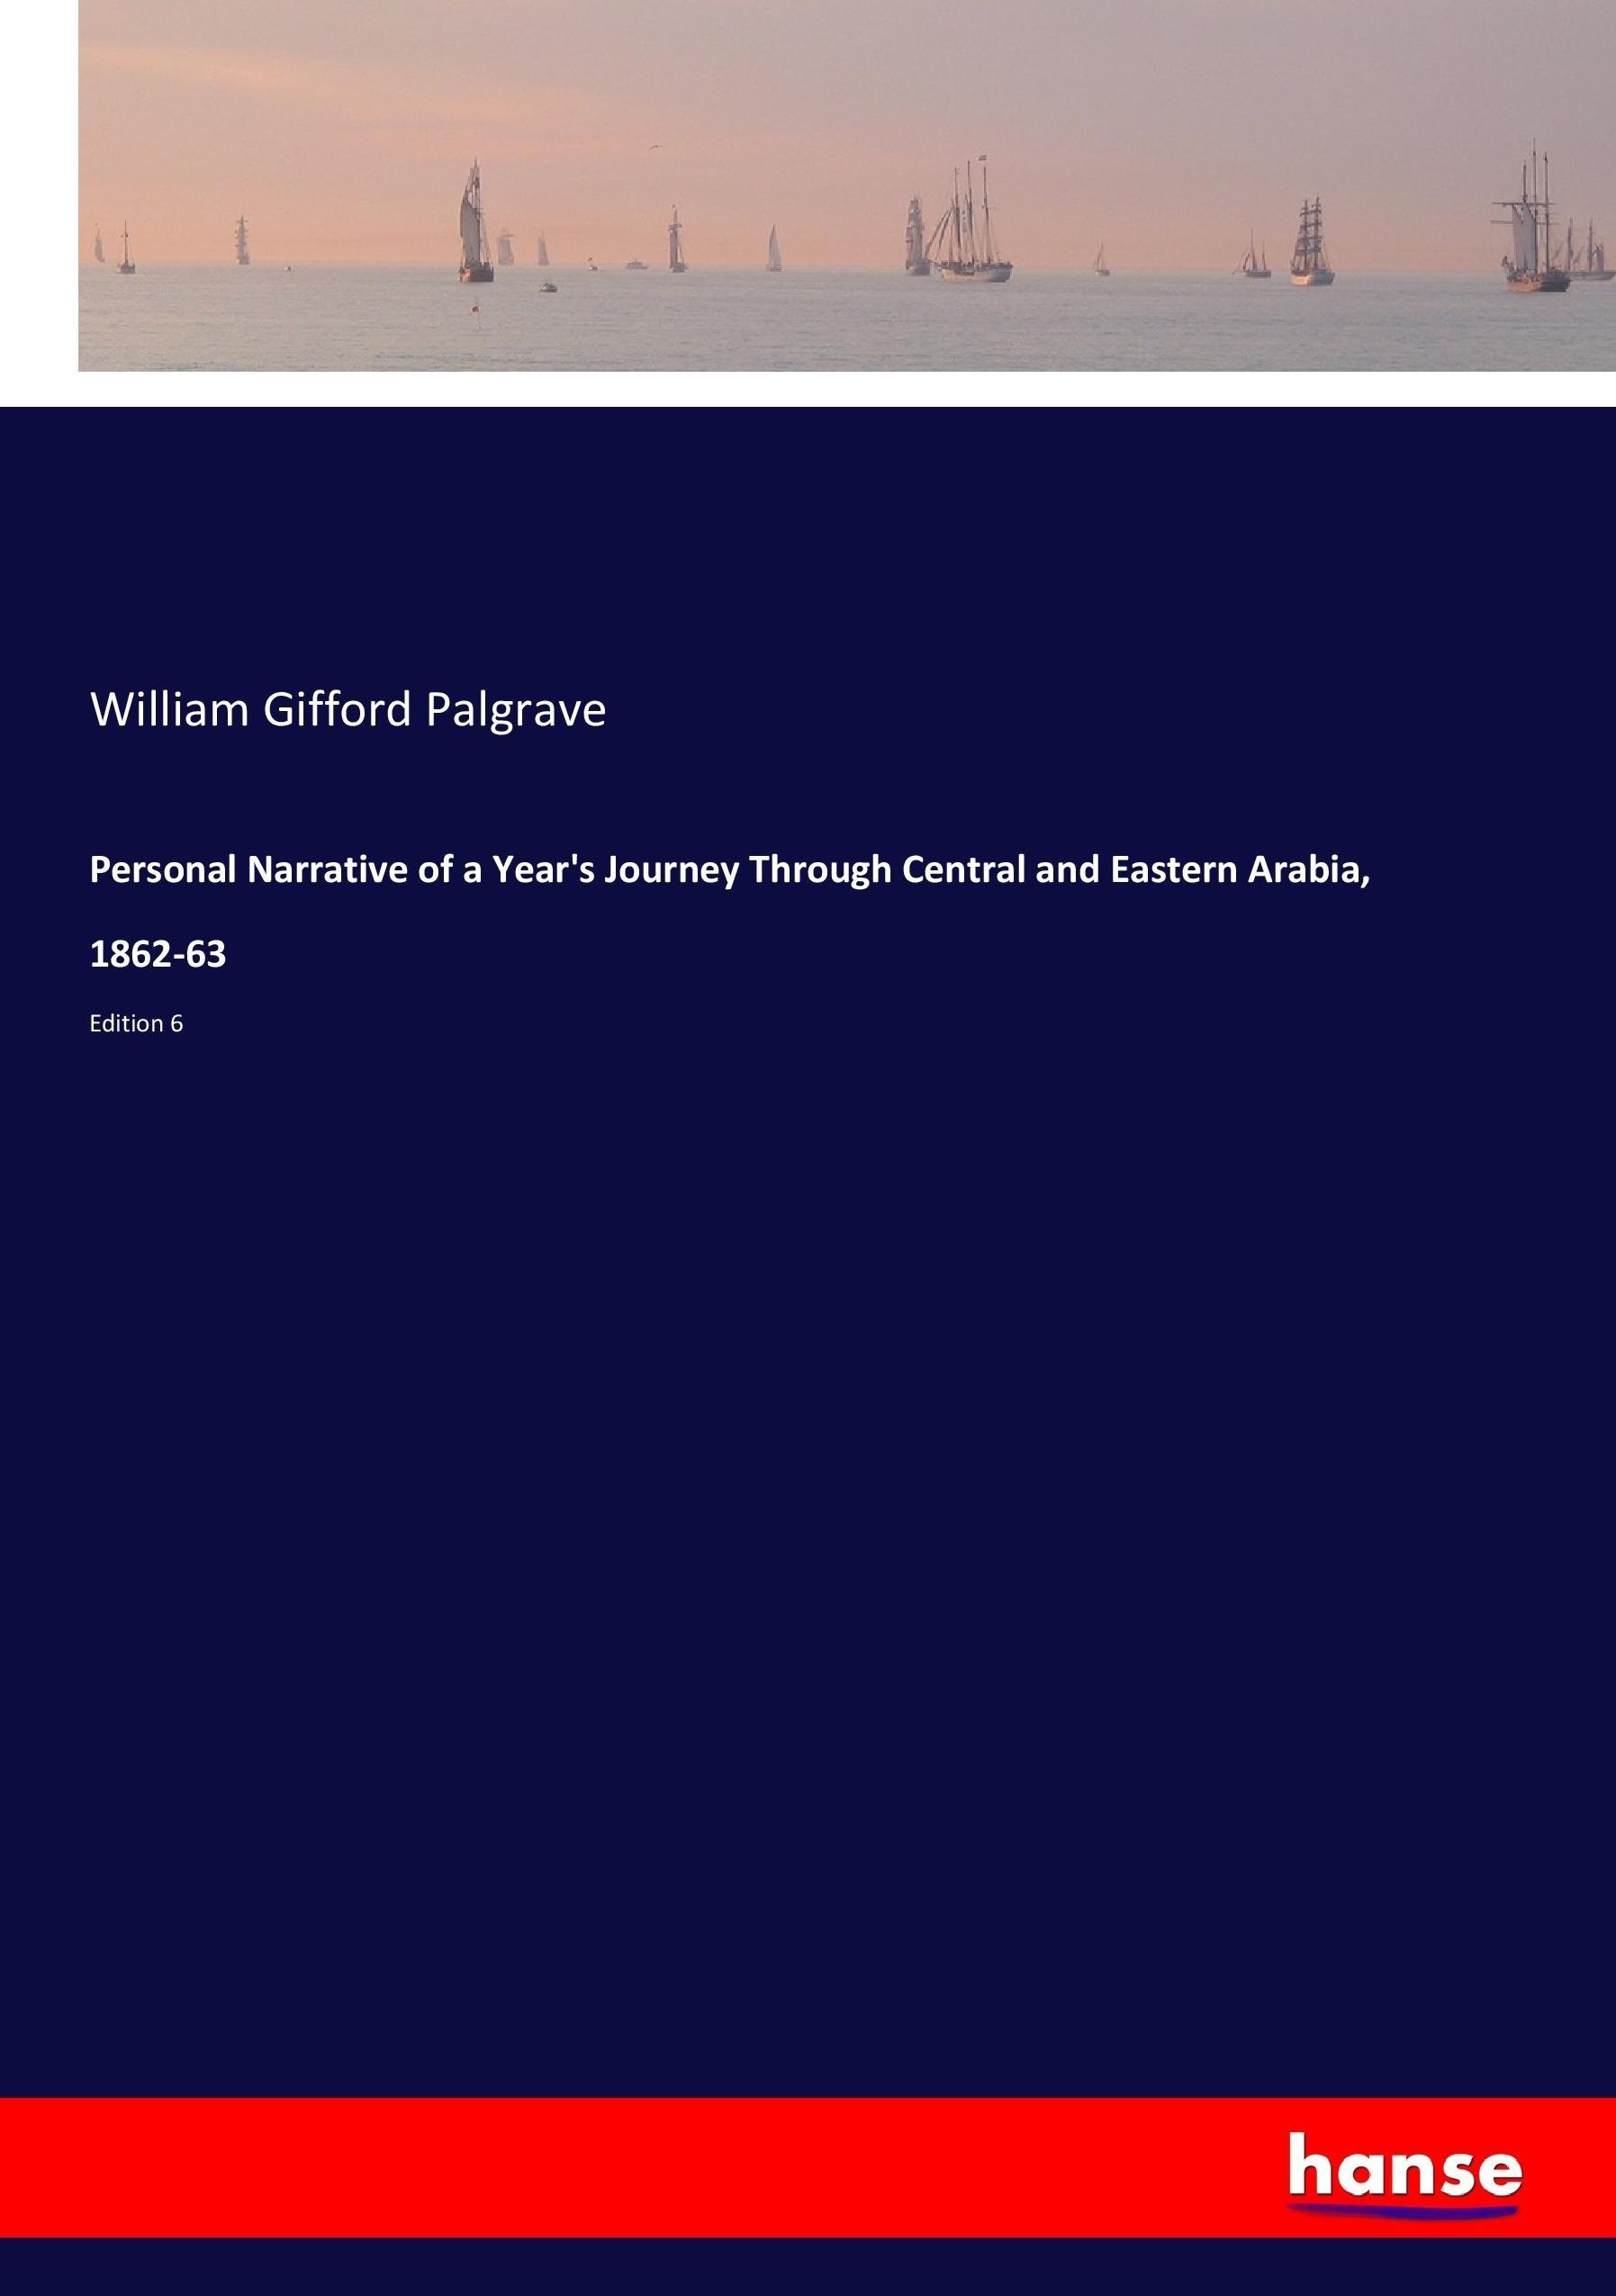 Personal Narrative of a Year's Journey Through Central and Eastern Arabia, 1862-63 | Edition 6 | William Gifford Palgrave | Taschenbuch | Paperback | 448 S. | Englisch | 2017 | hansebooks - Palgrave, William Gifford